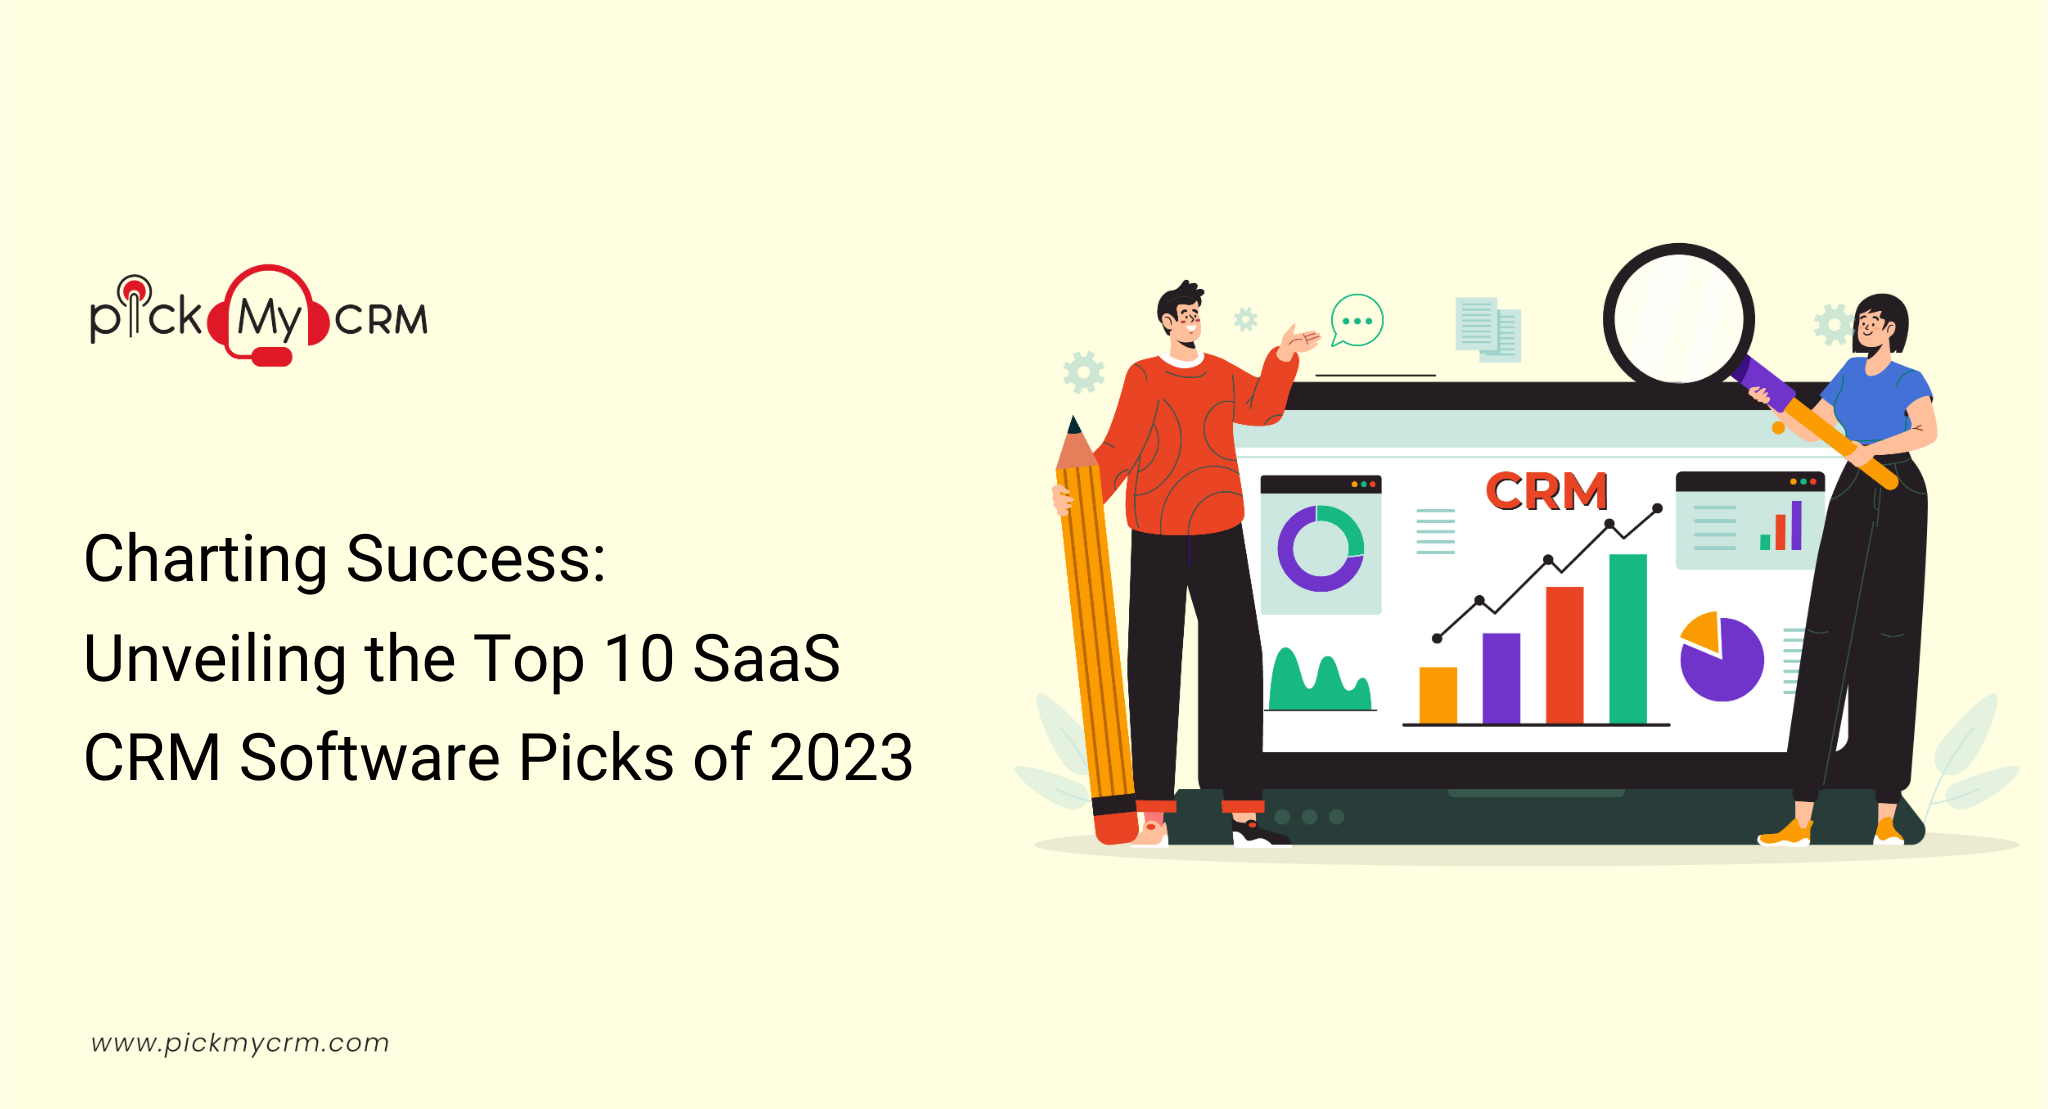 Charting Success: Unveiling the Top 10 SaaS CRM Software Picks of 2023